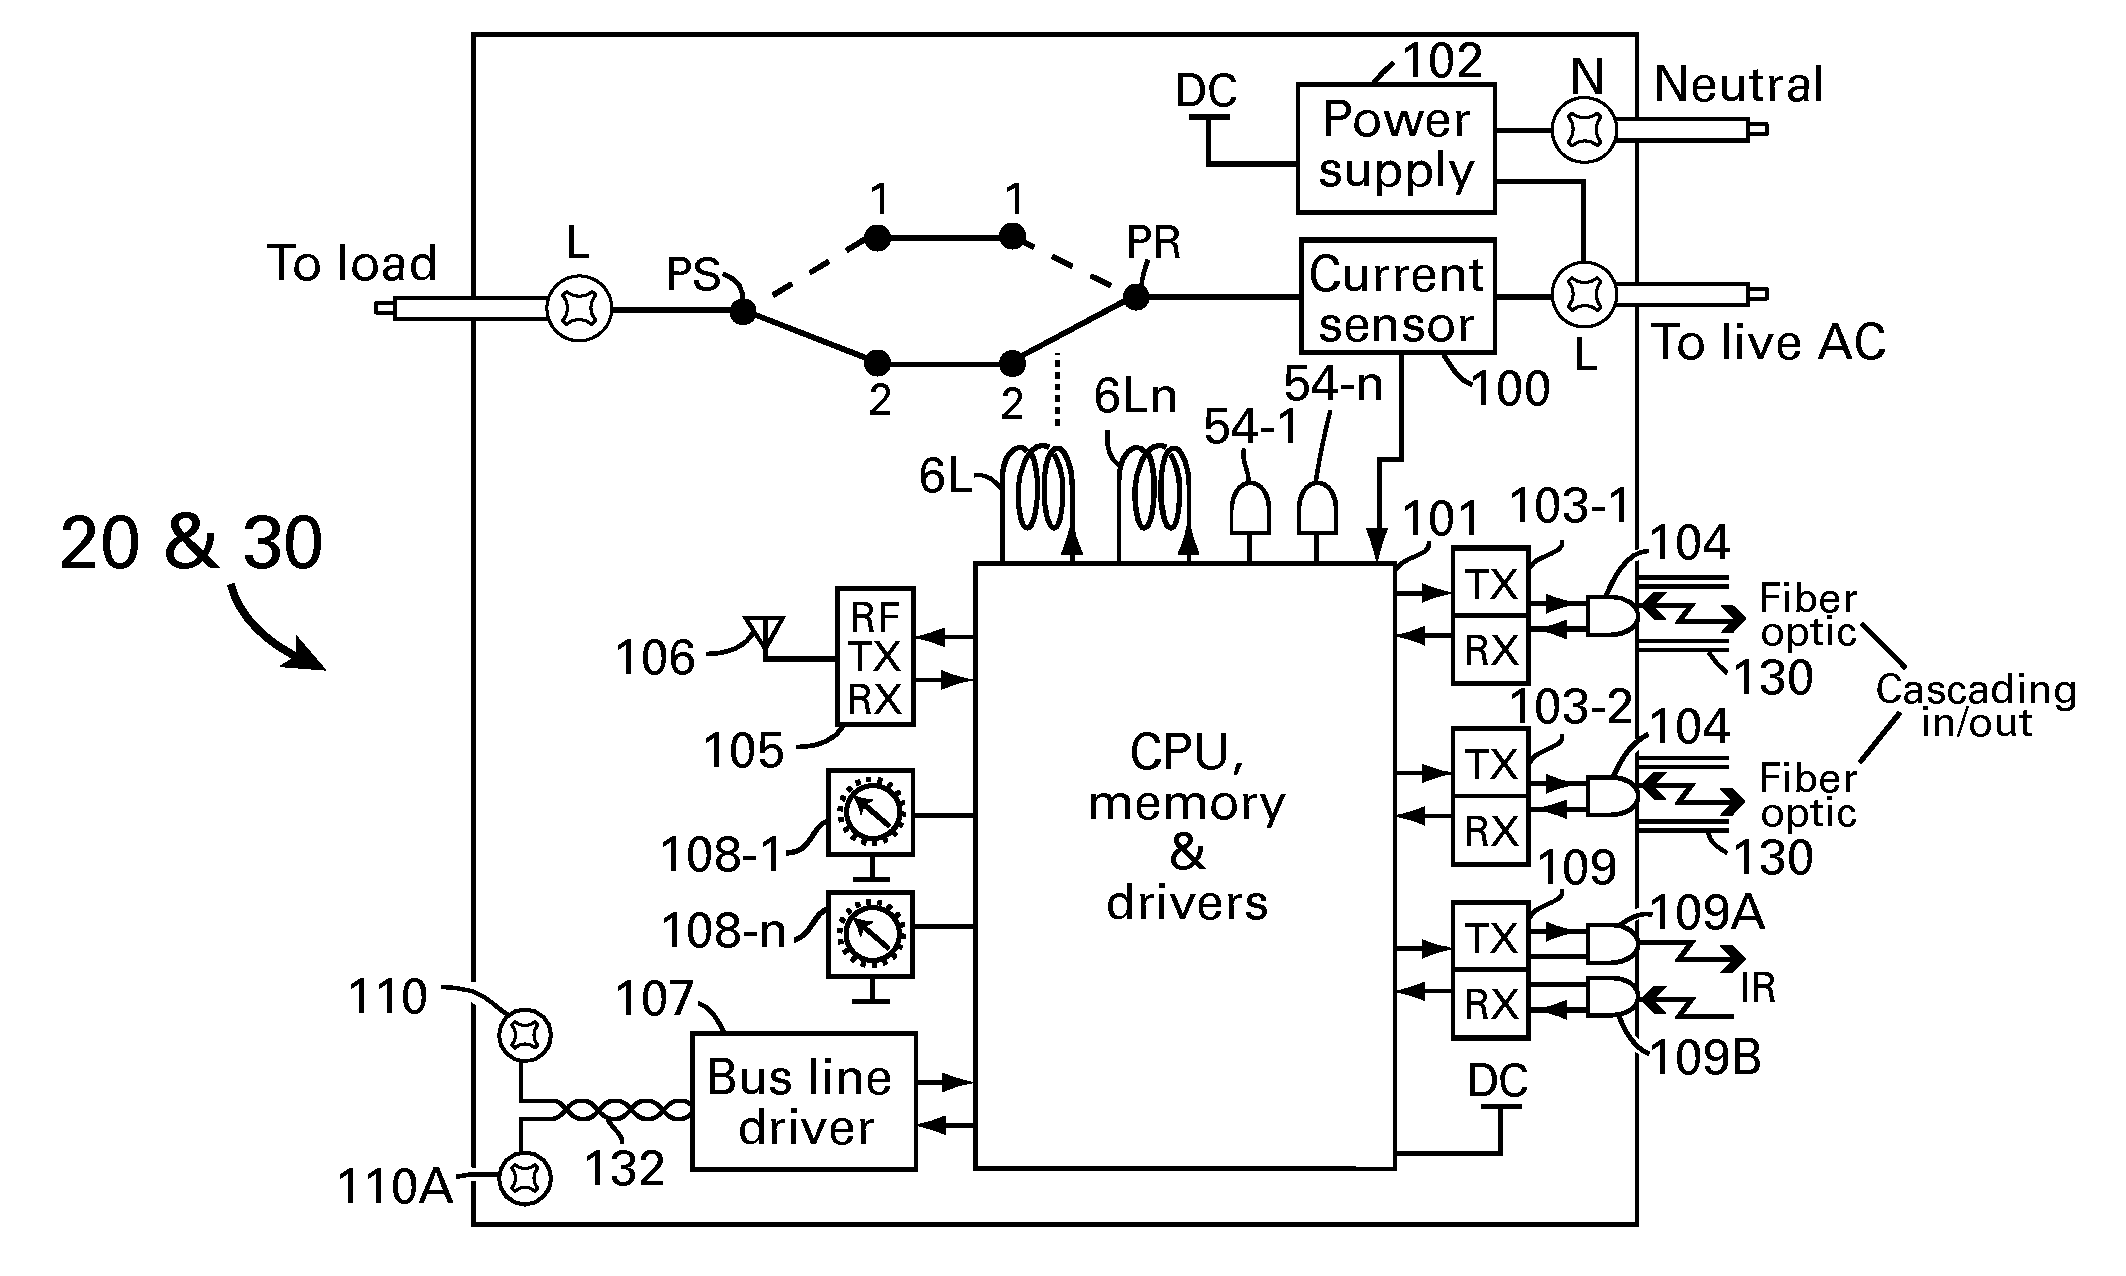 Integrated SPDT or DPDT switch with SPDT relay combination for use in residence automation